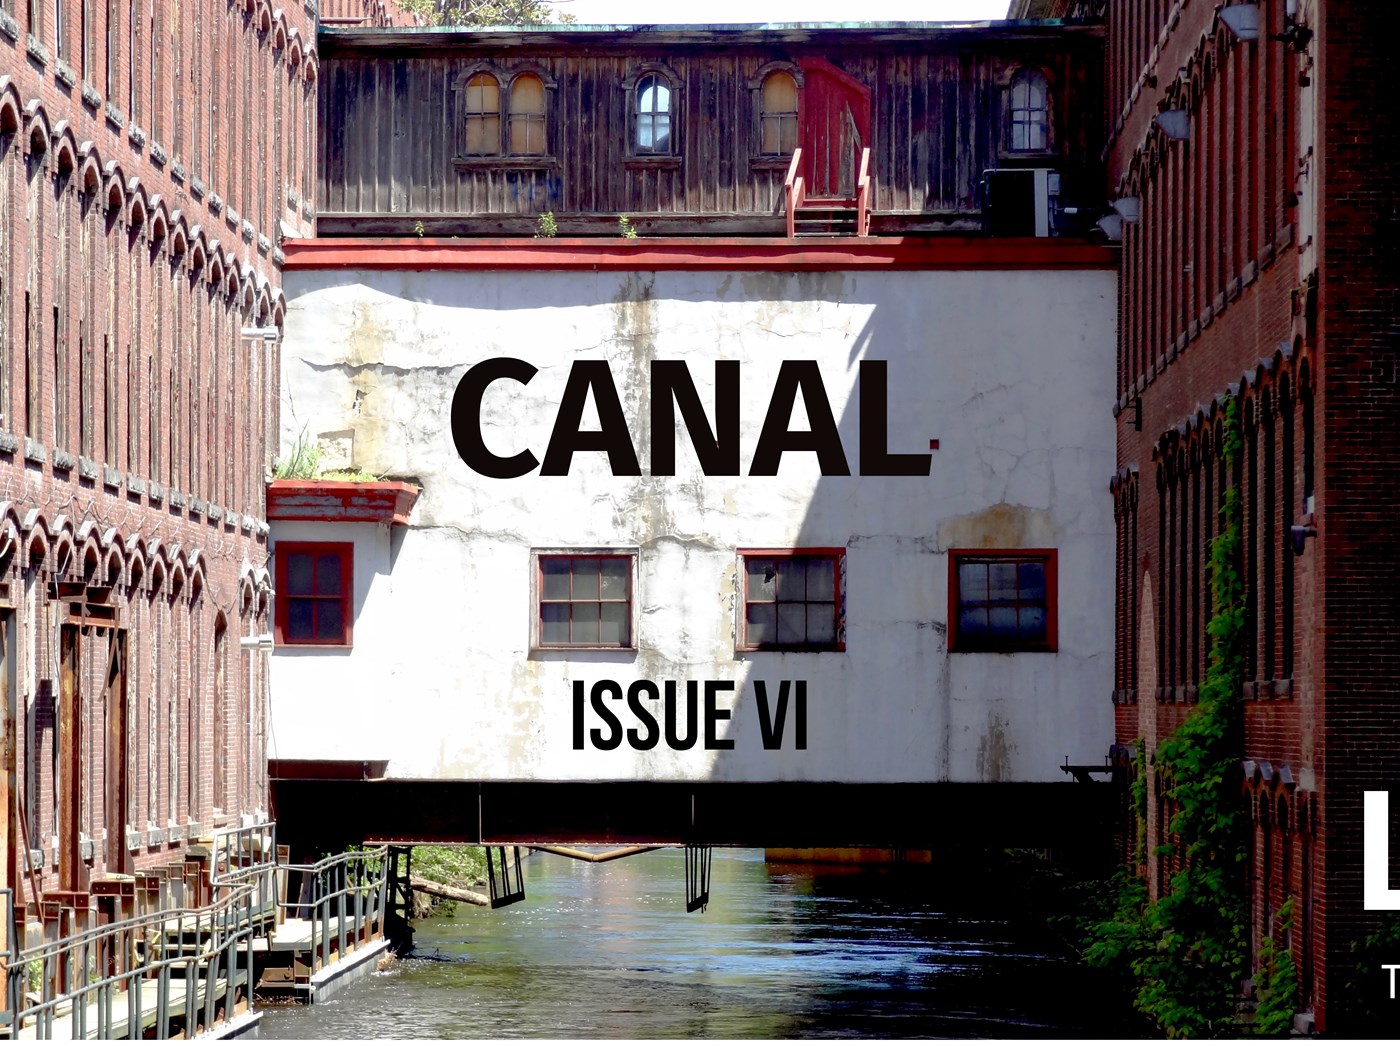 Building over water with the words CANAL ISSUE VI superimposed on them.